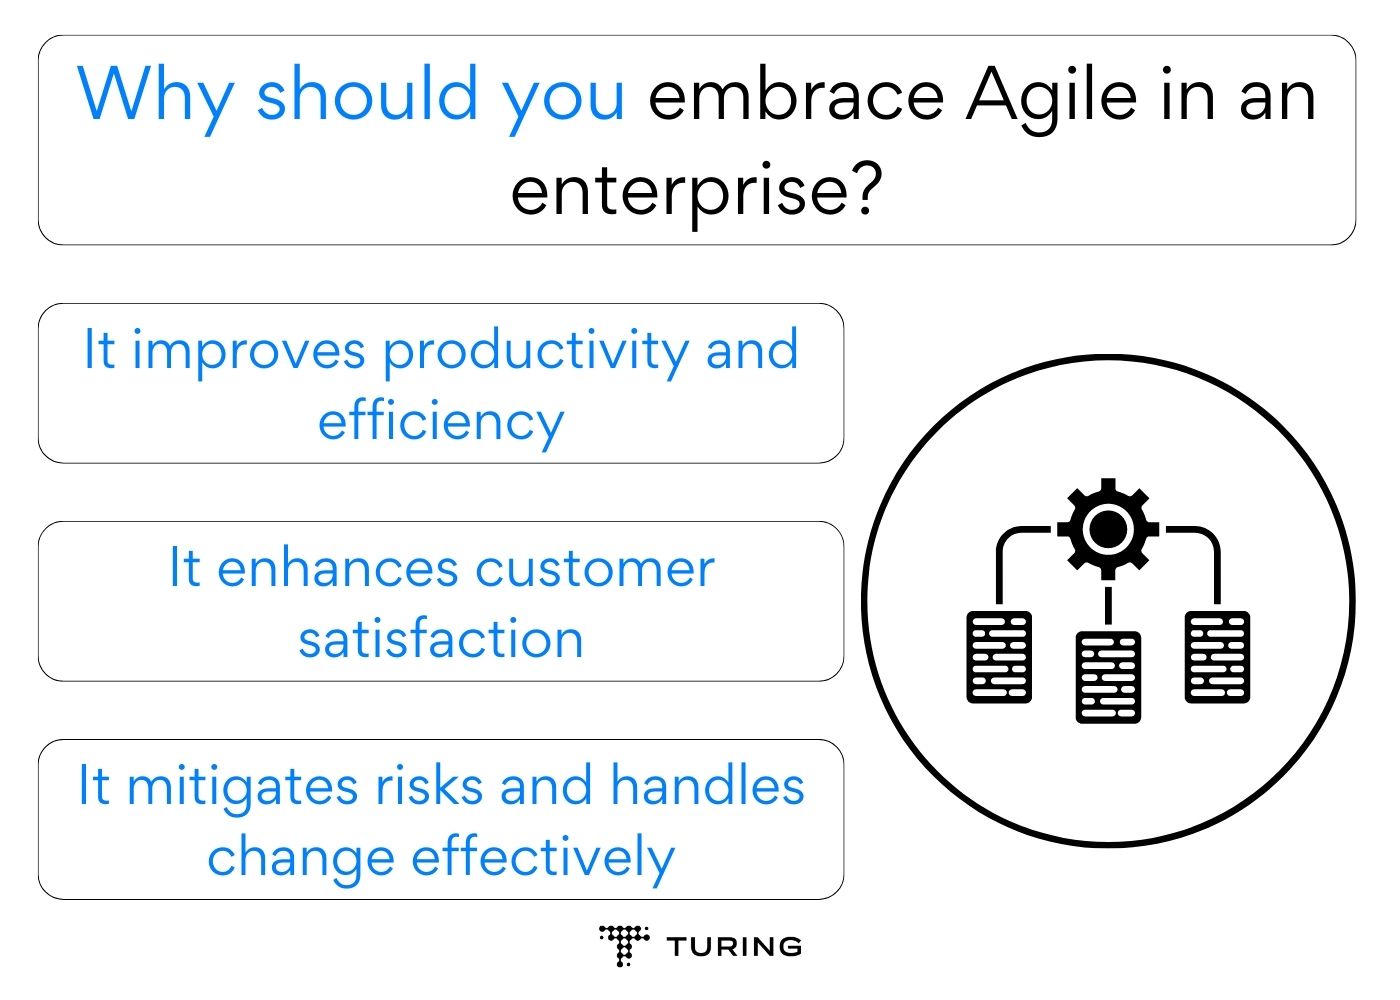 Why should you embrace Agile in an enterprise